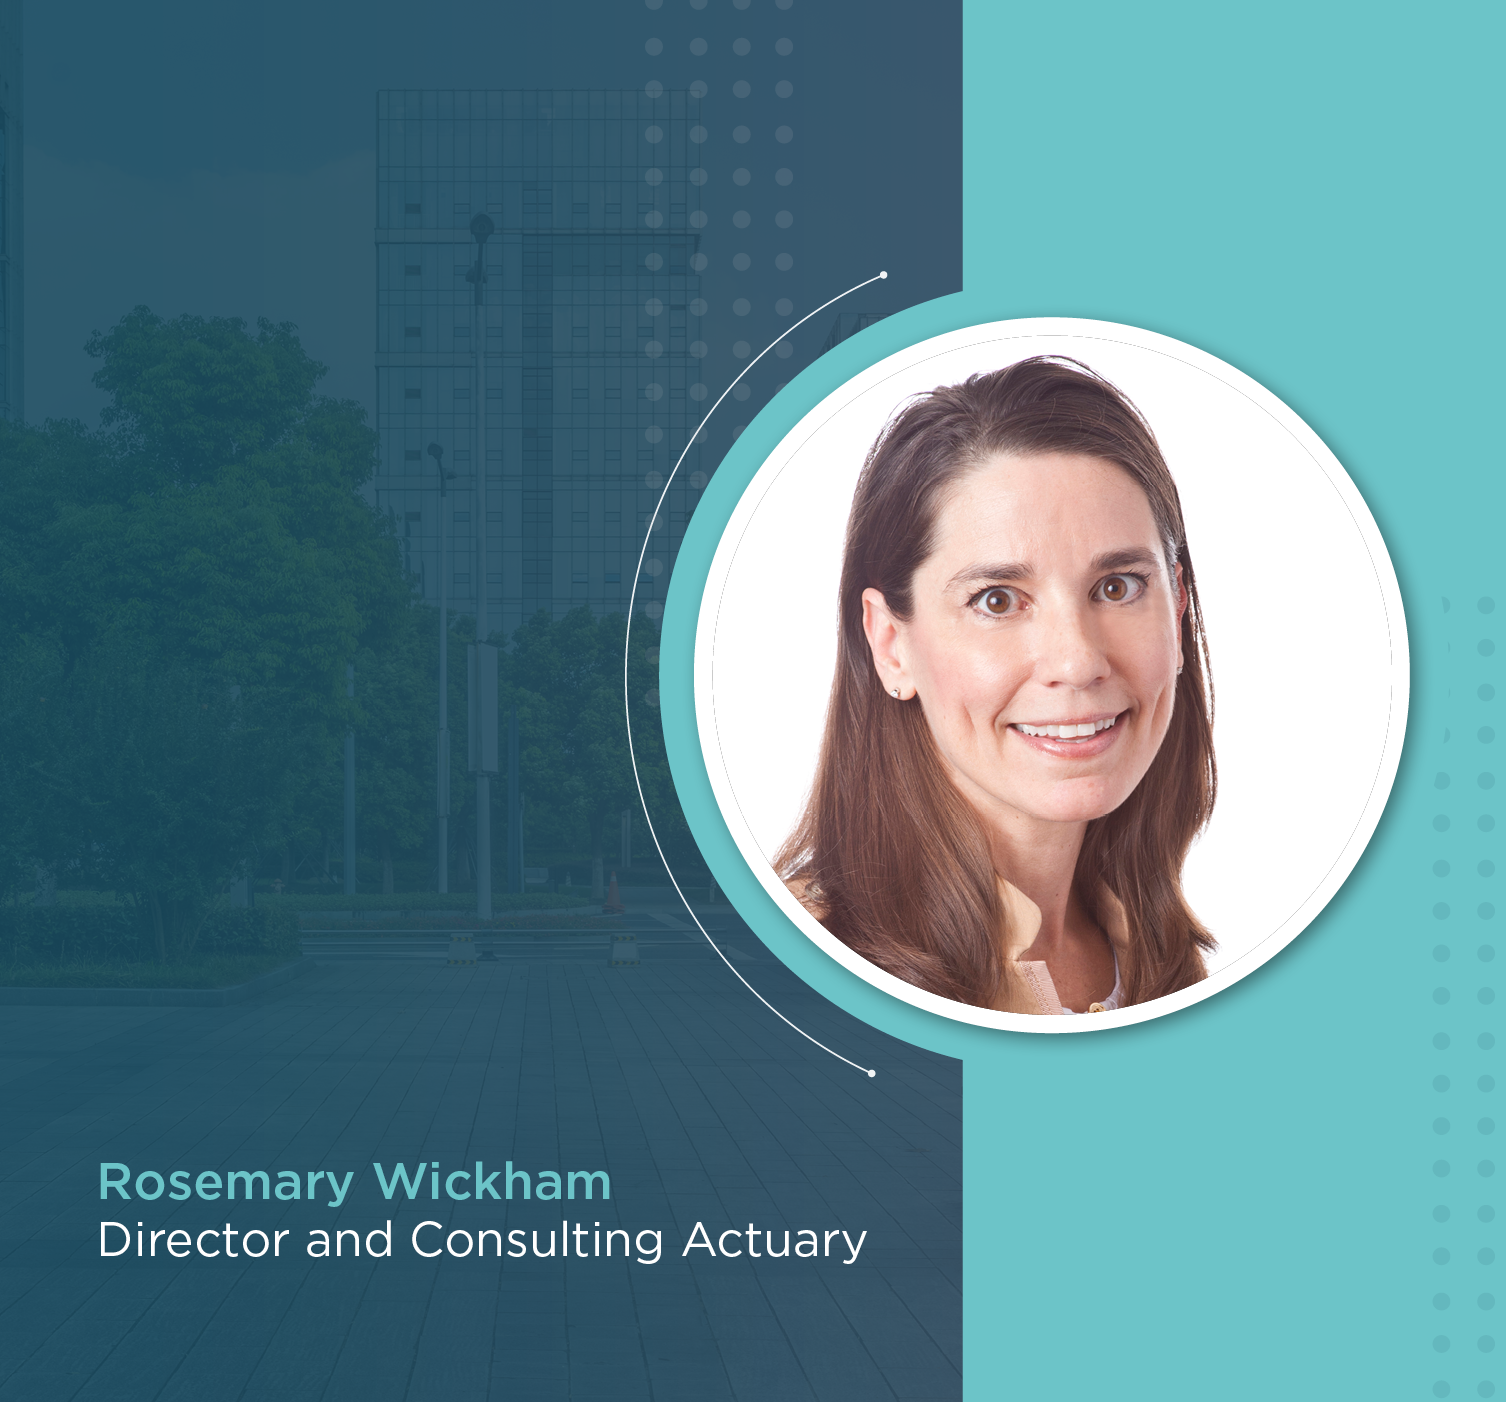 Rosemary Wickham, Director and Consulting Actuary